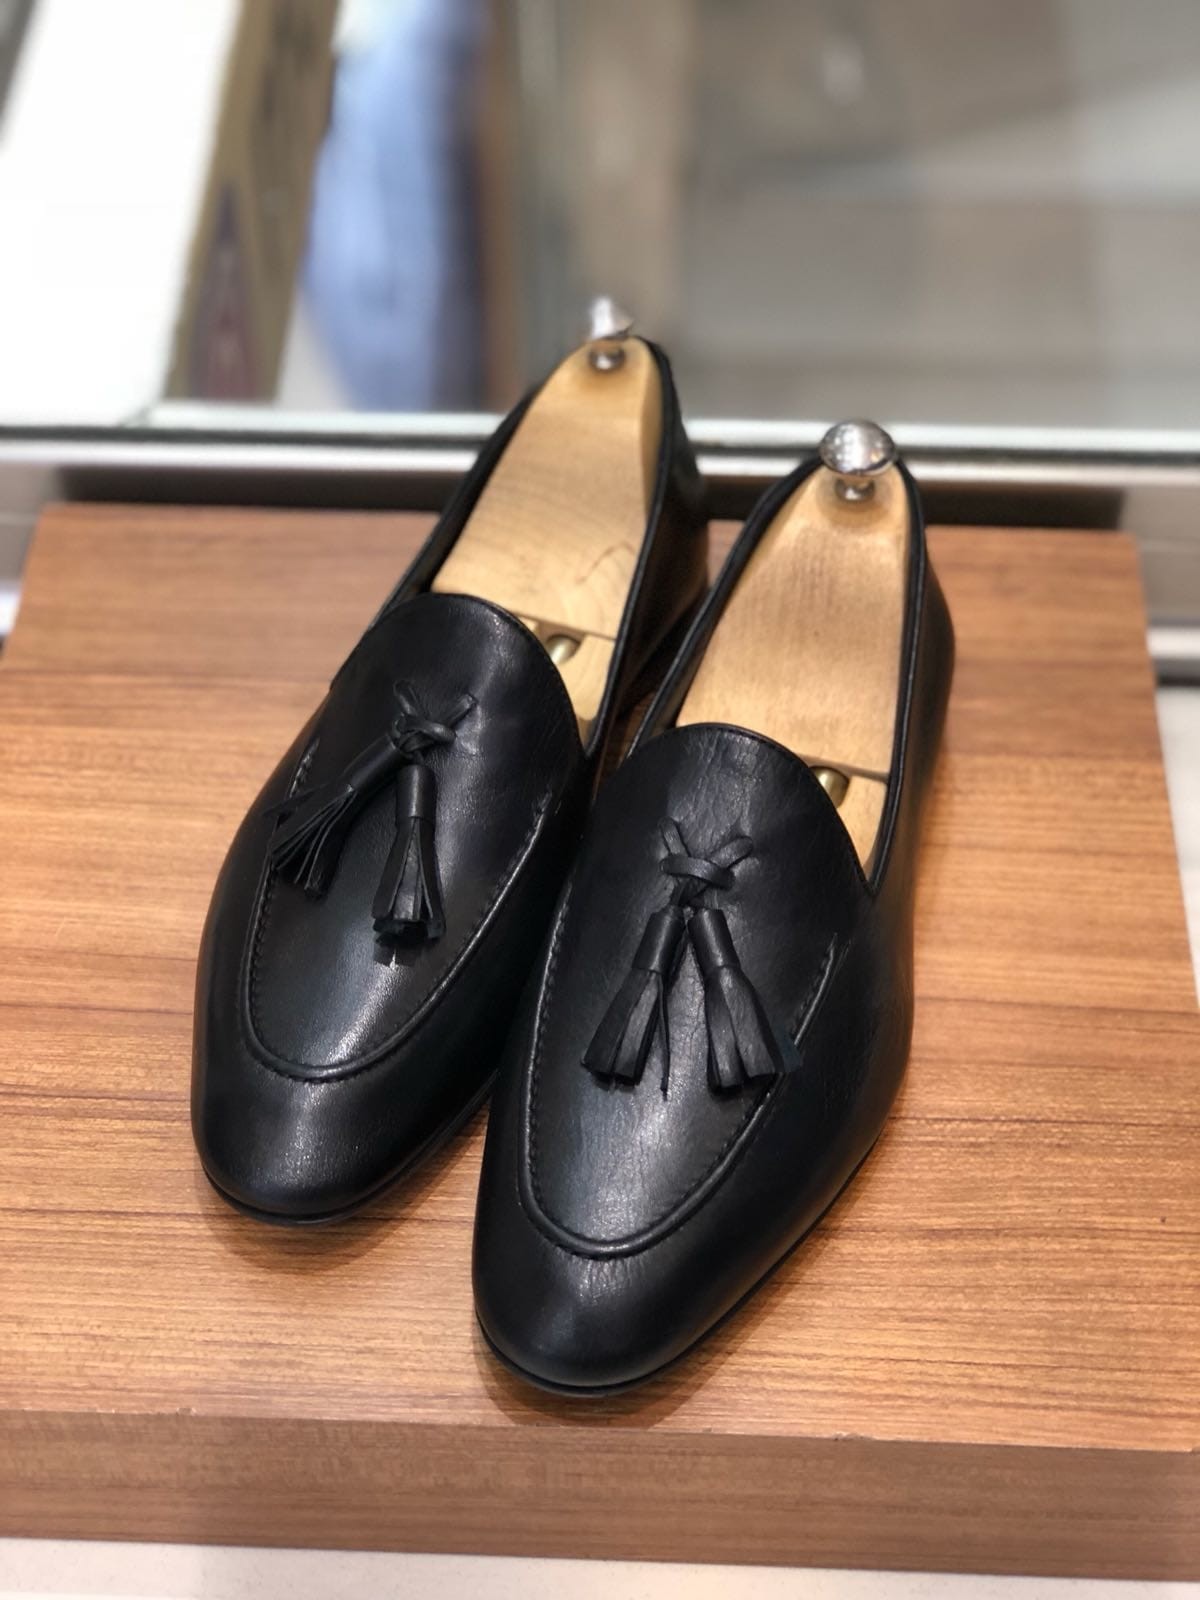 Buy Black Tassel Loafer by Gentwith.com with Free Shipping